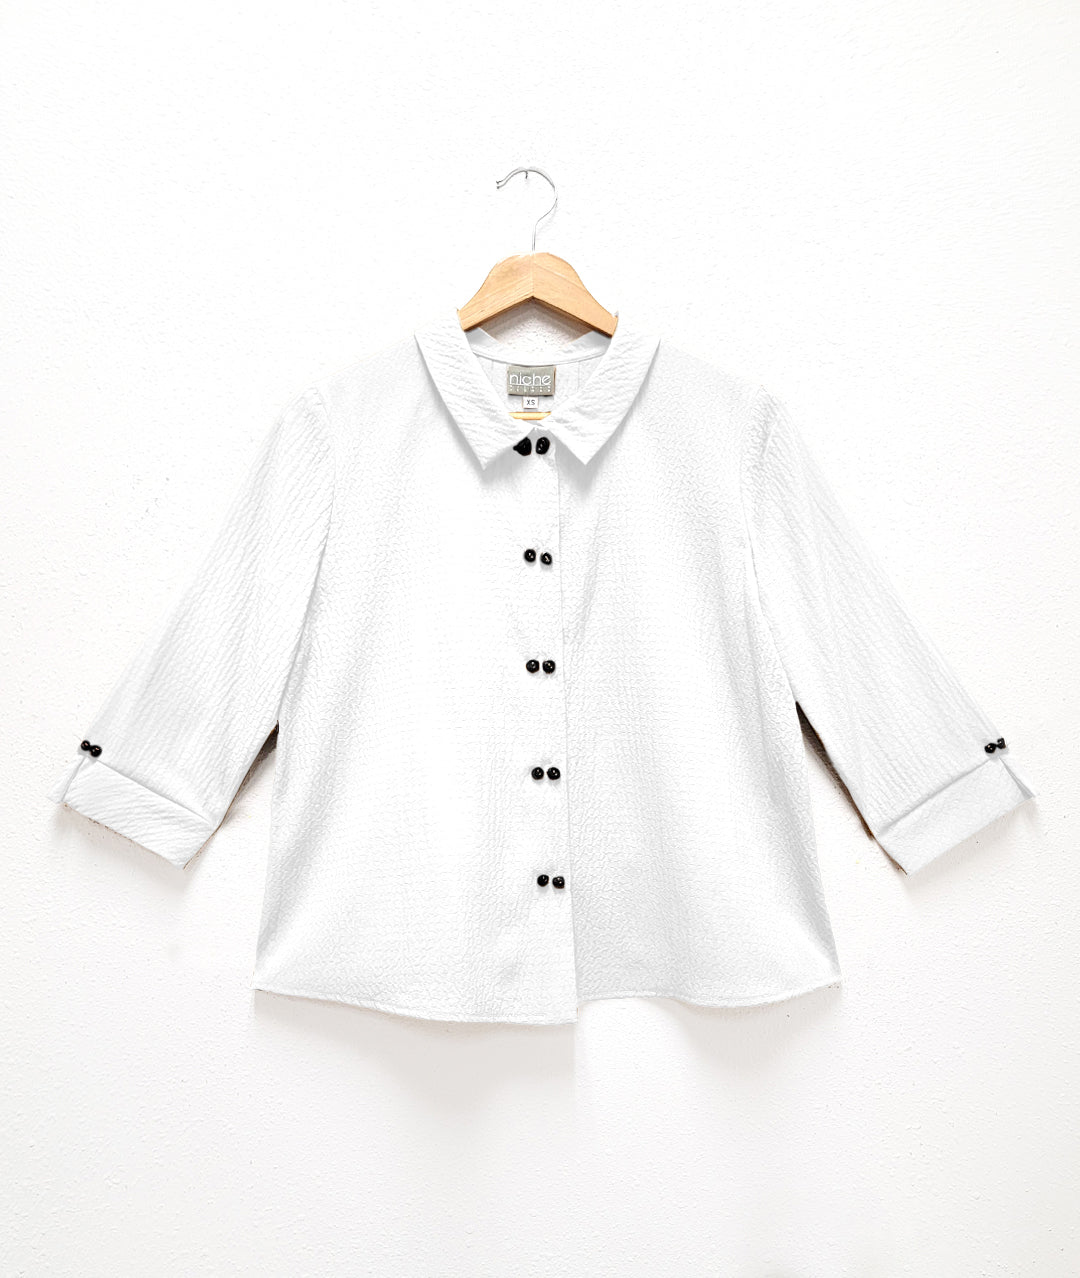 white, seersucker textured top with double sets of "twin" shell buttons down the front, easy a-line shape and straight hem. 3/4 length sleeves, with inverted pleat and open notched collar in back.